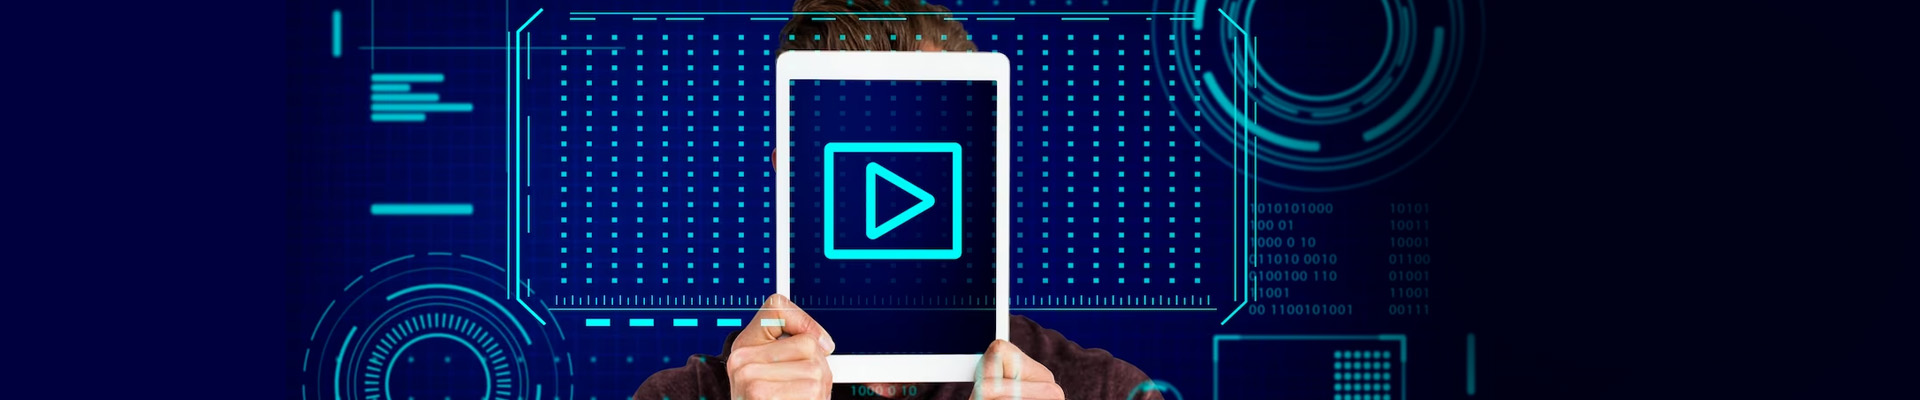 Why is Video Advertising the Future?
